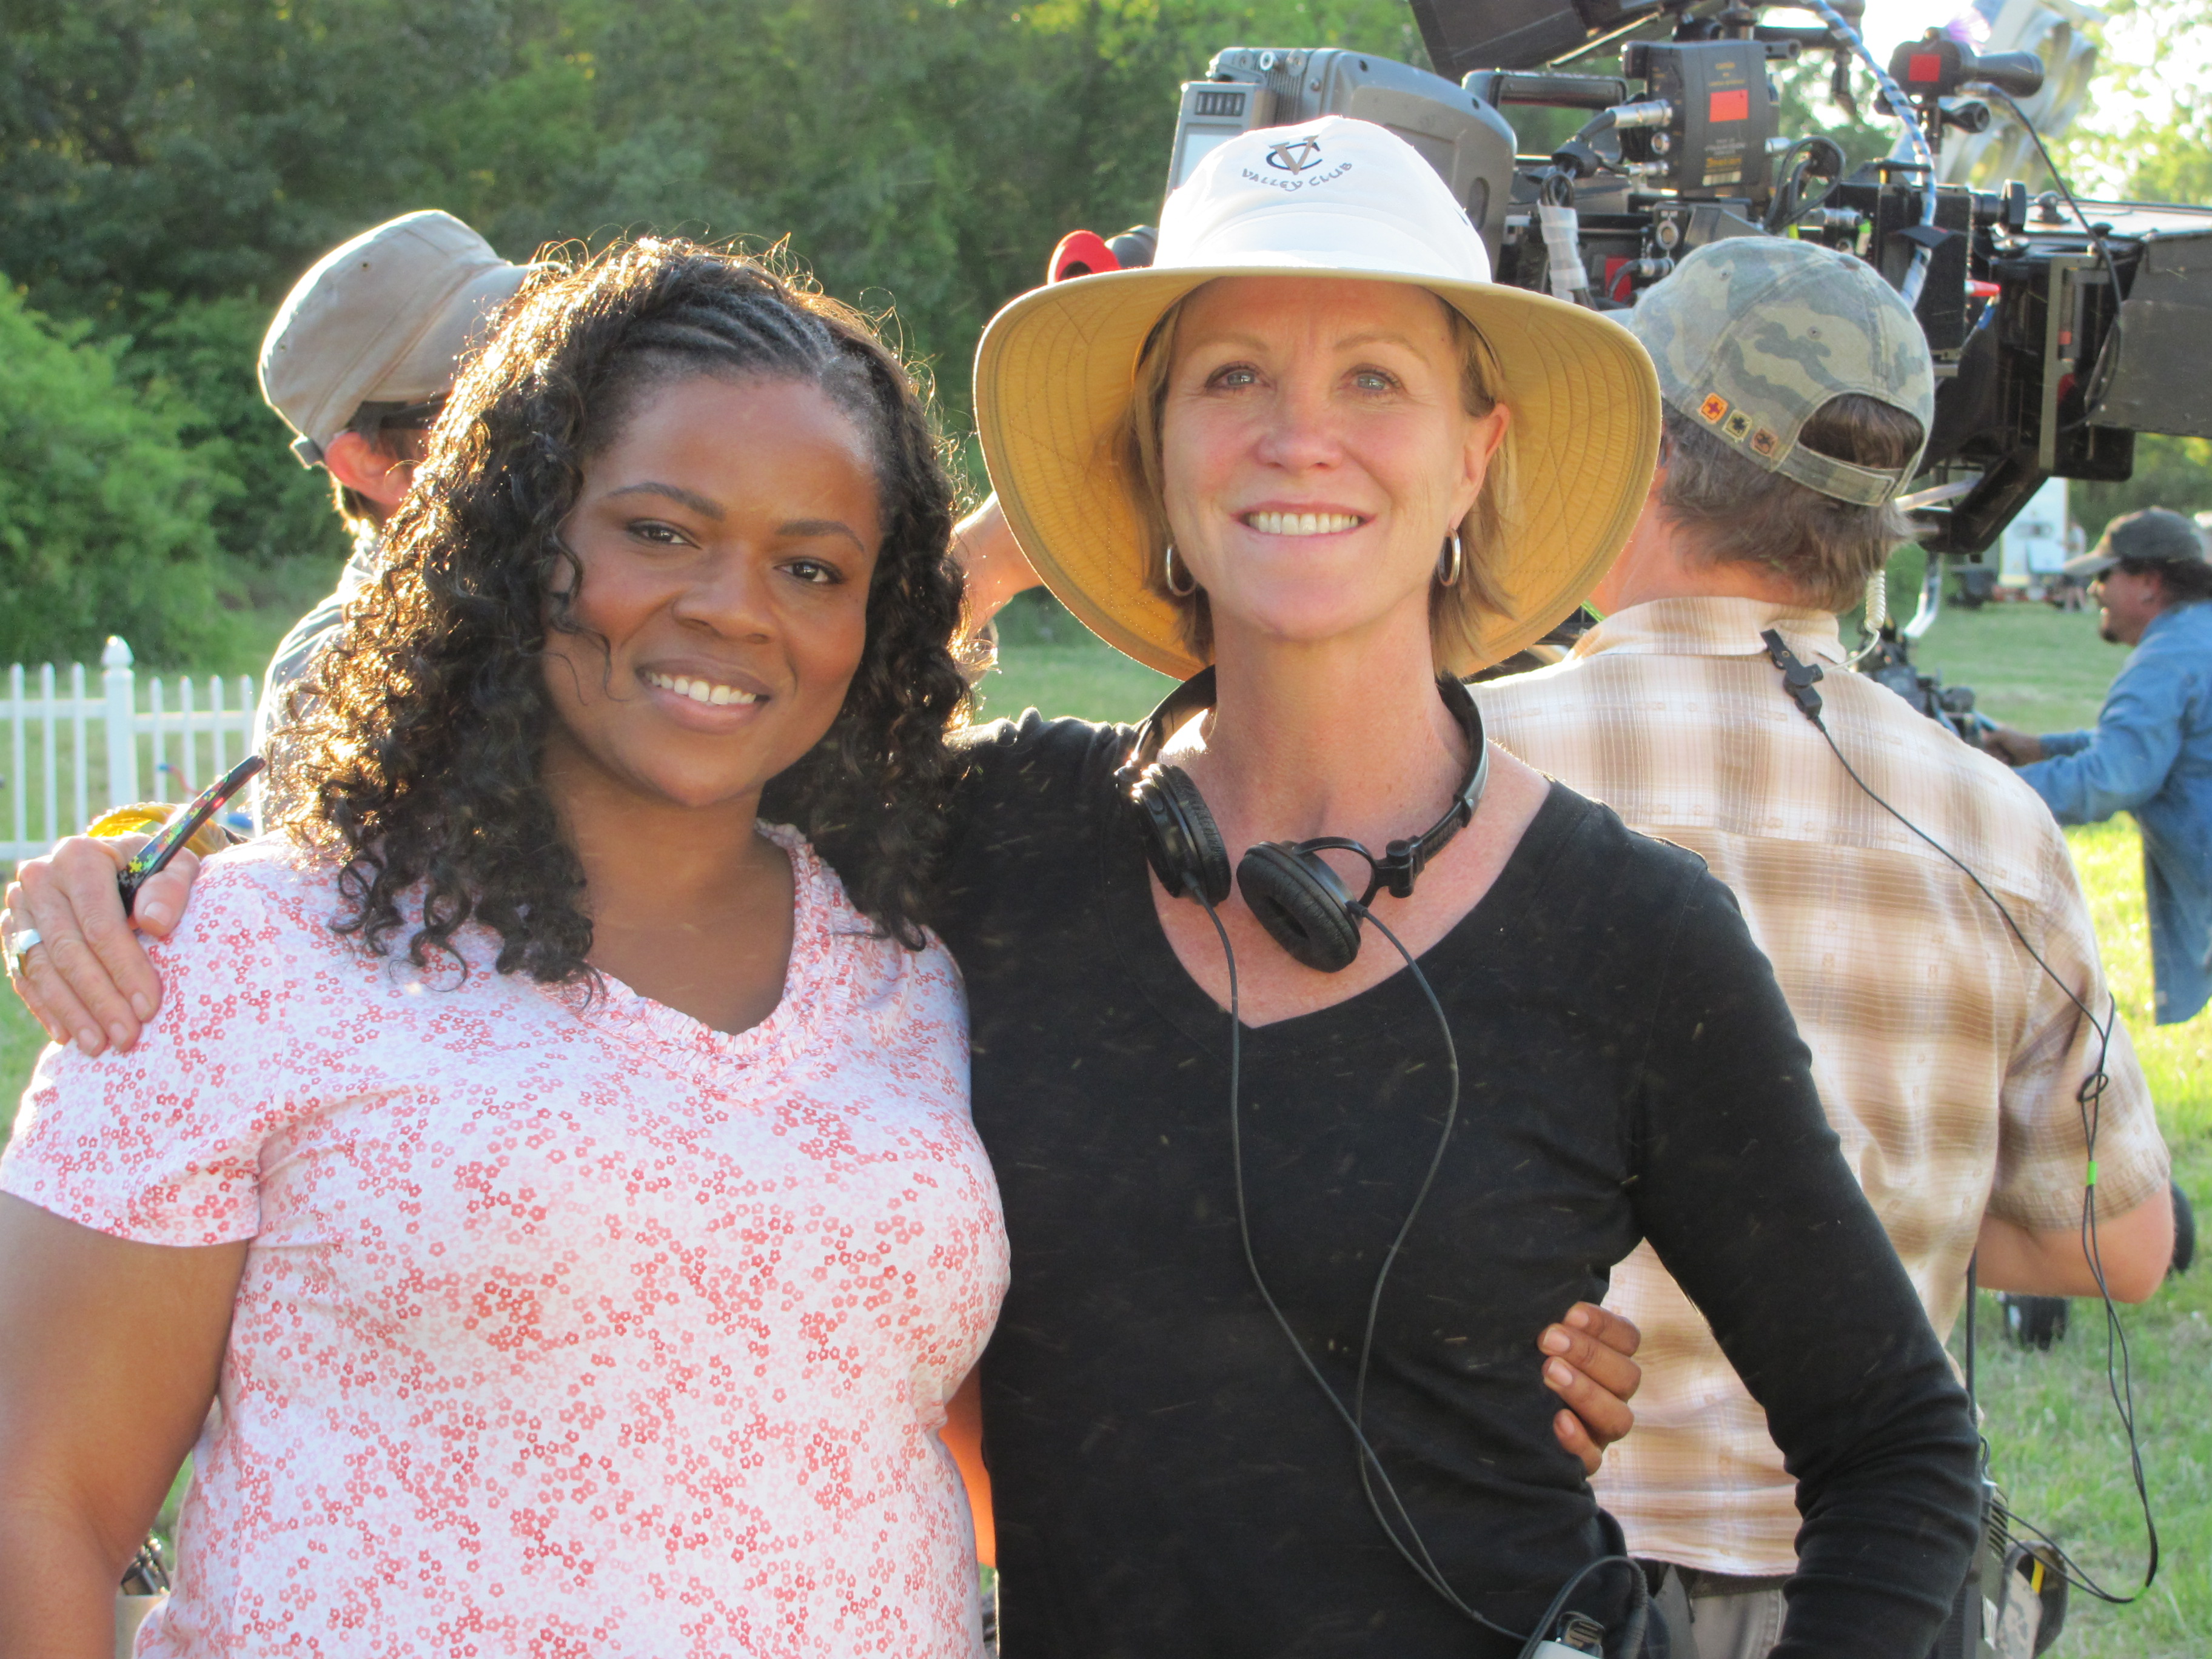 On set of Lifetime's Army Wives (Ep 411) 2010 Deja Dee and Director/Actress Joanna Kerns